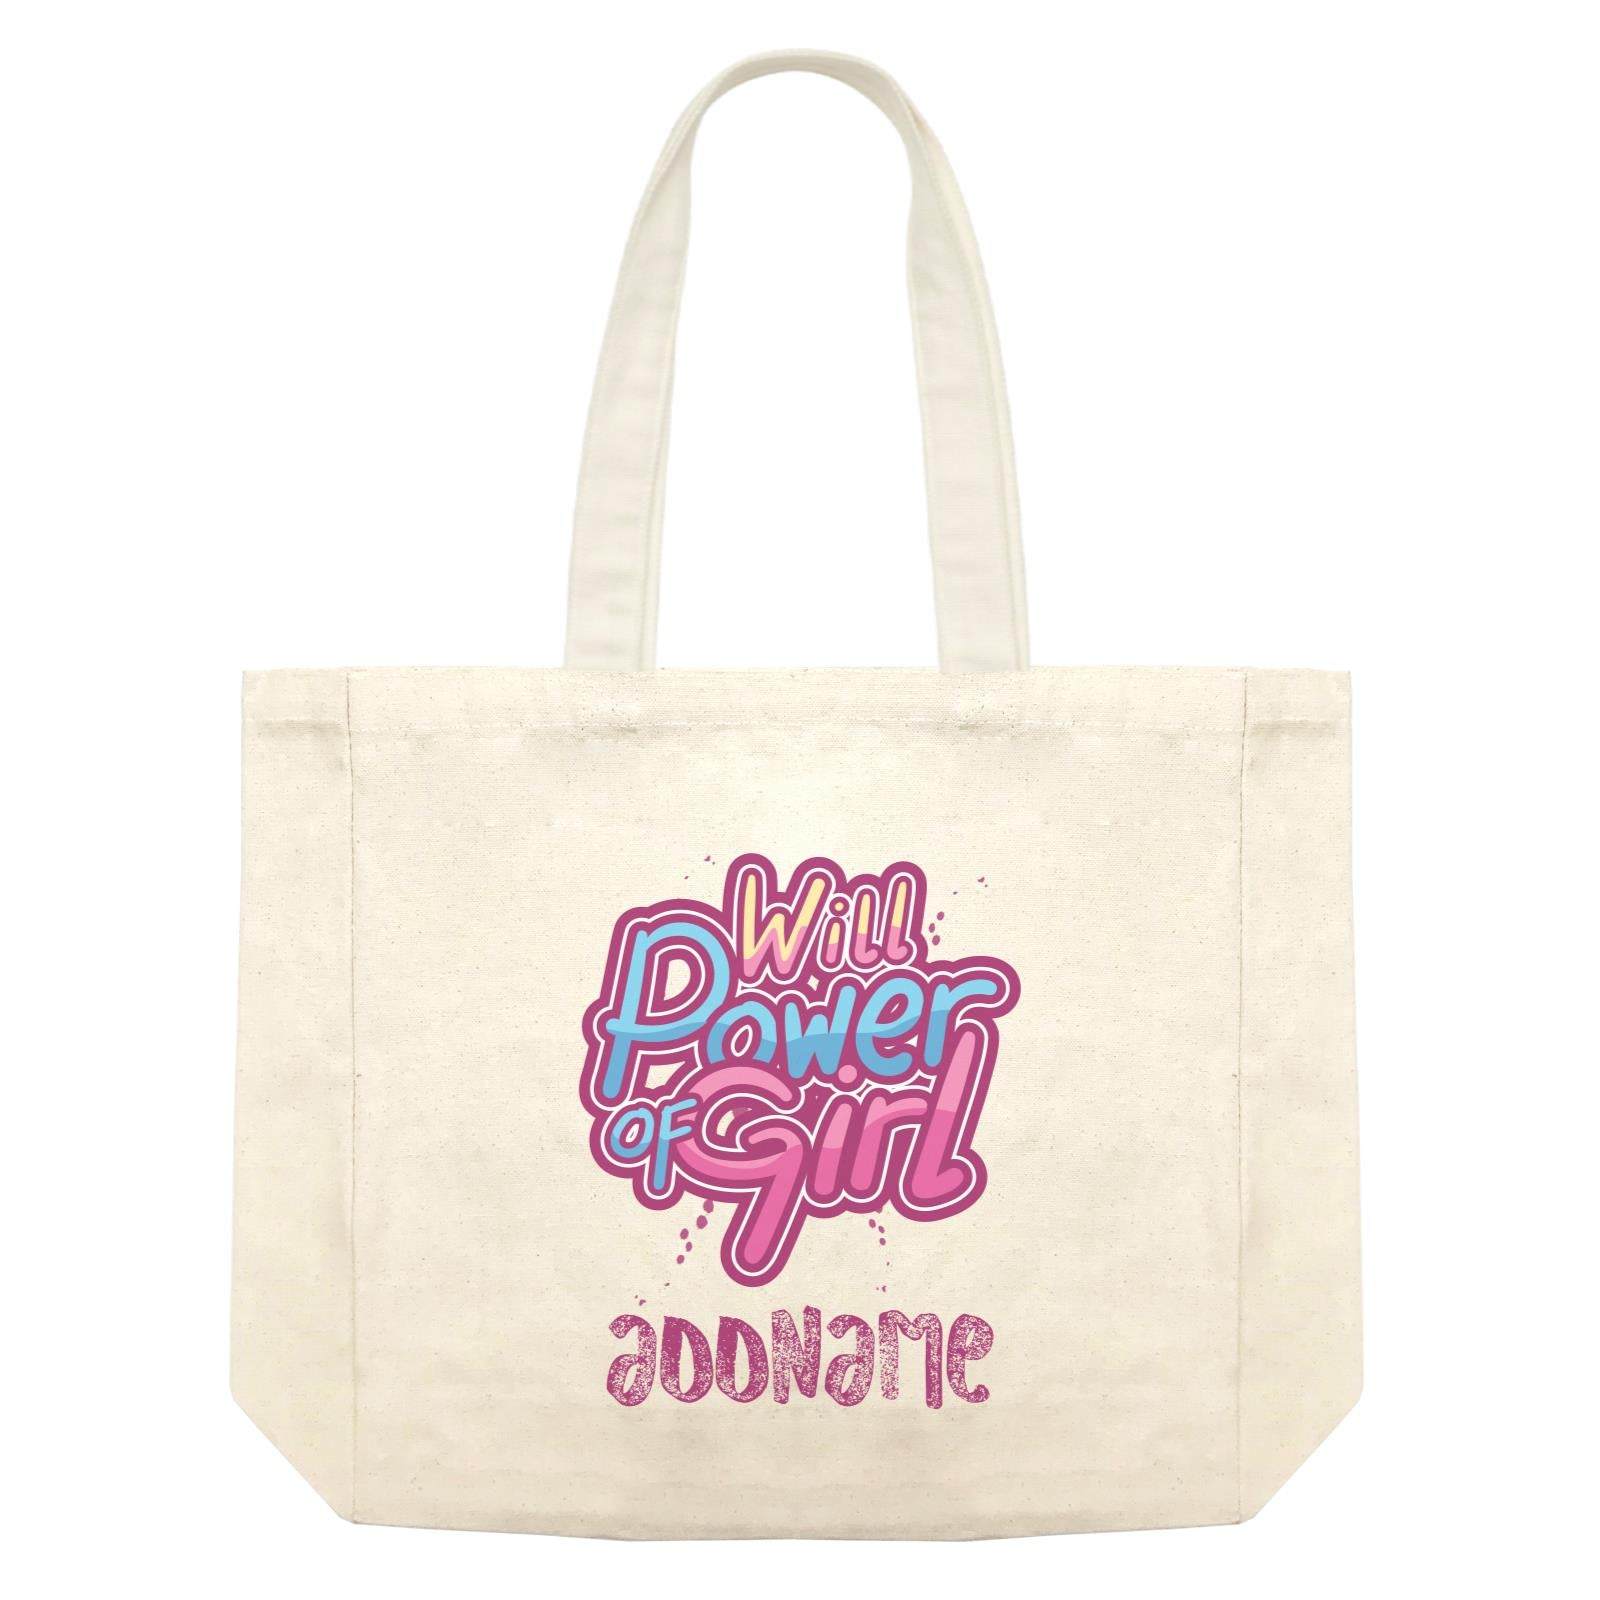 Cool Cute Words Will Power Of Girl Addname Shopping Bag